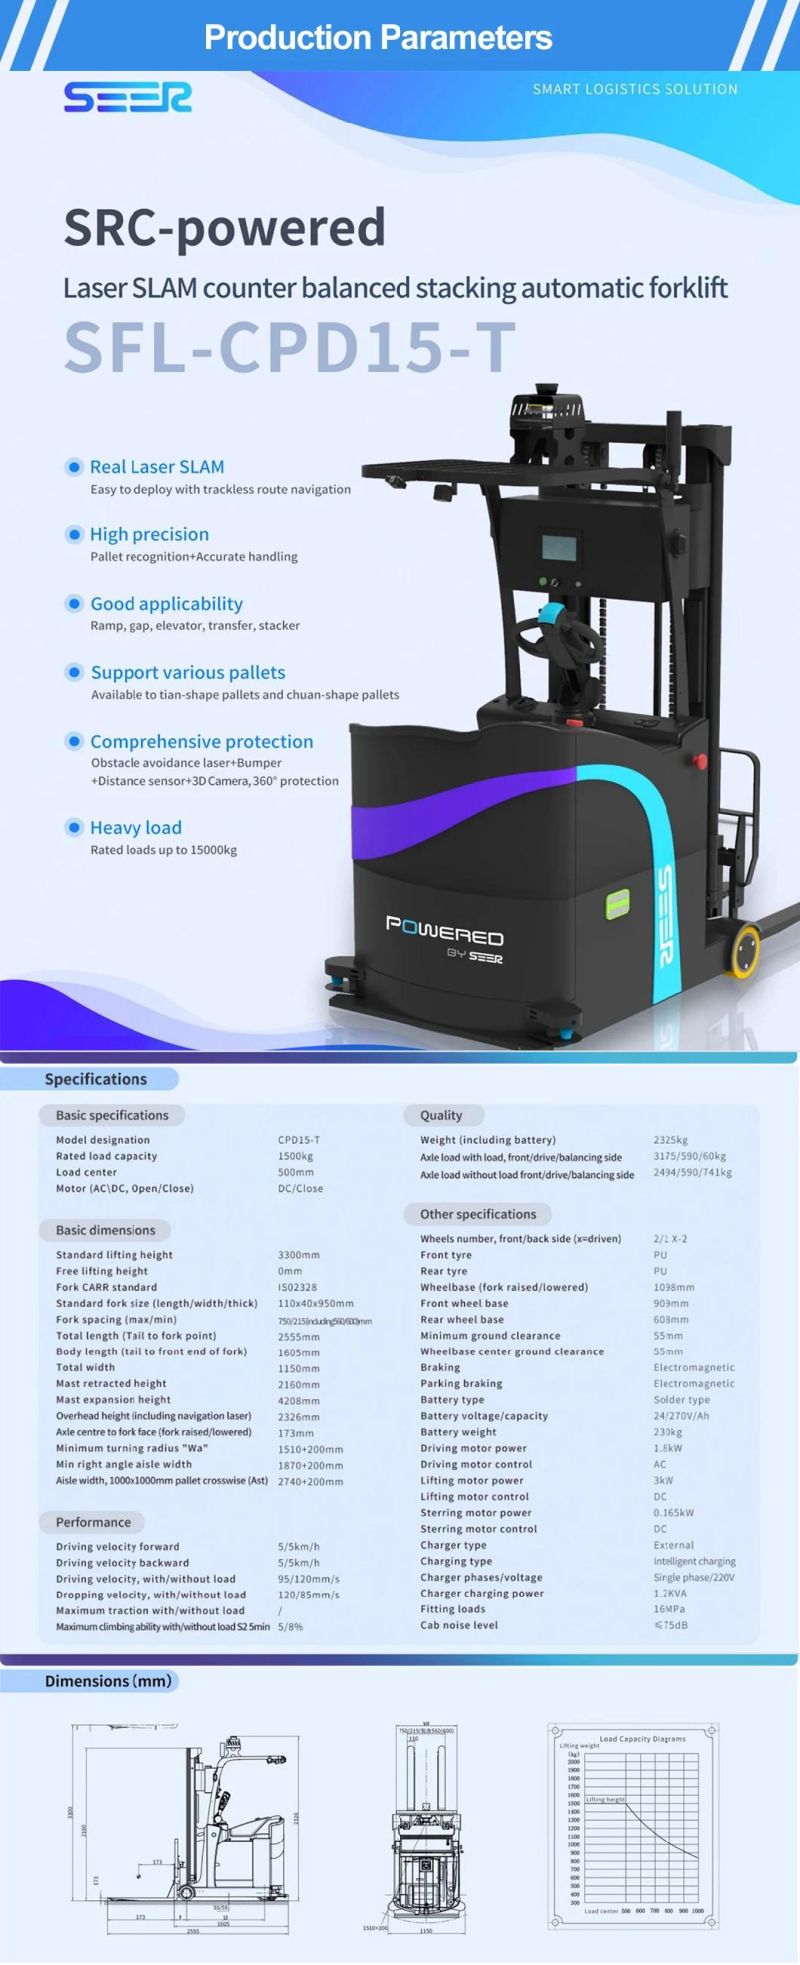 Electromagnetic Brake Laser Slam Speed Feedback Automated Guided Forklift with Low Price